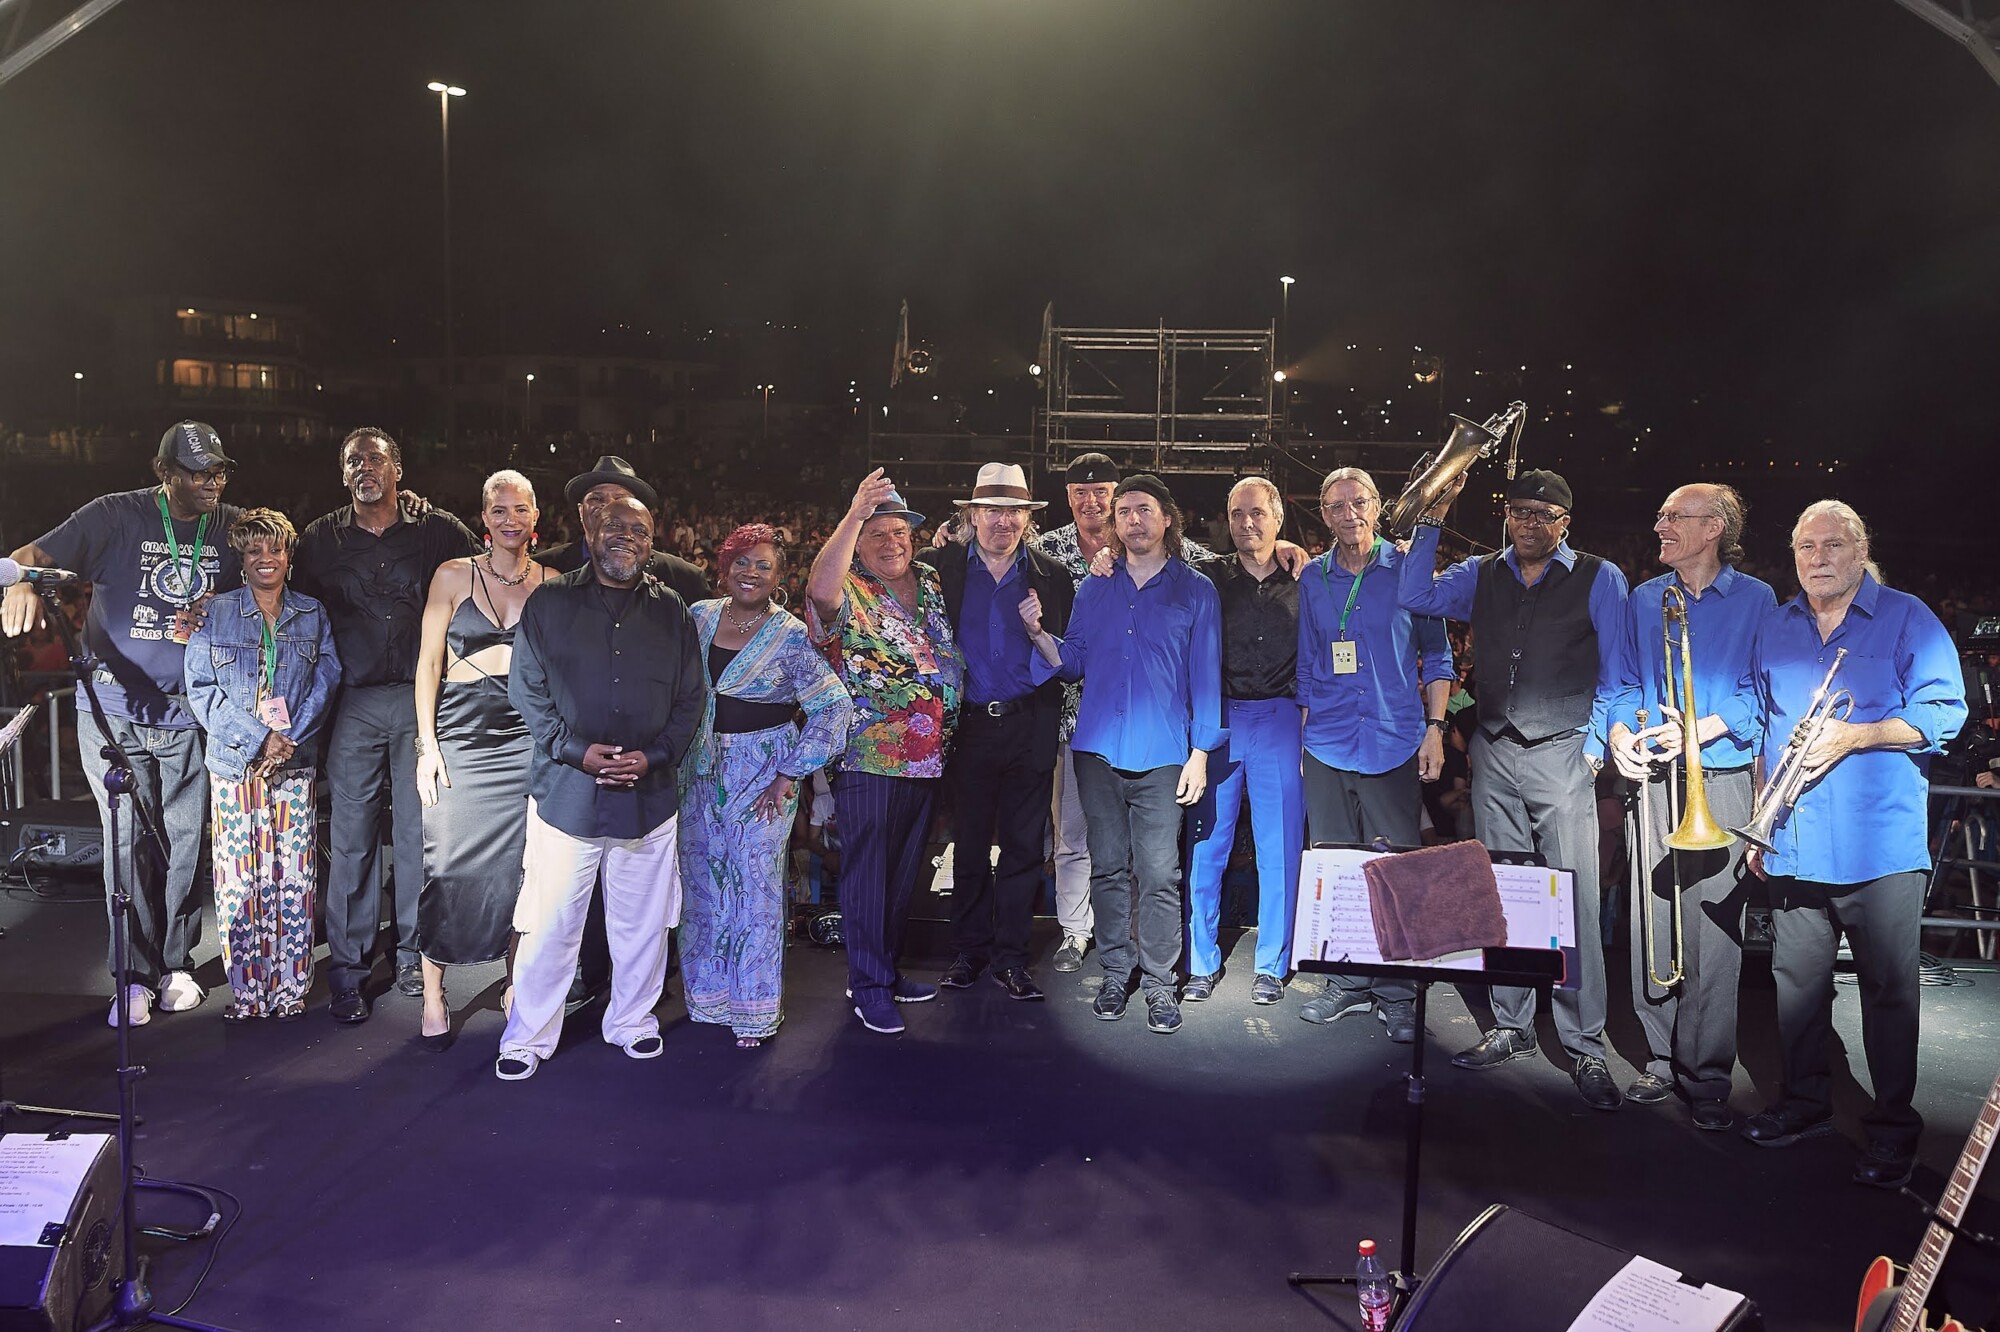 Maspalomas Soul Festival closes its successful sixth edition in Boogie Woogie style, ‘cus the music certainly moved them